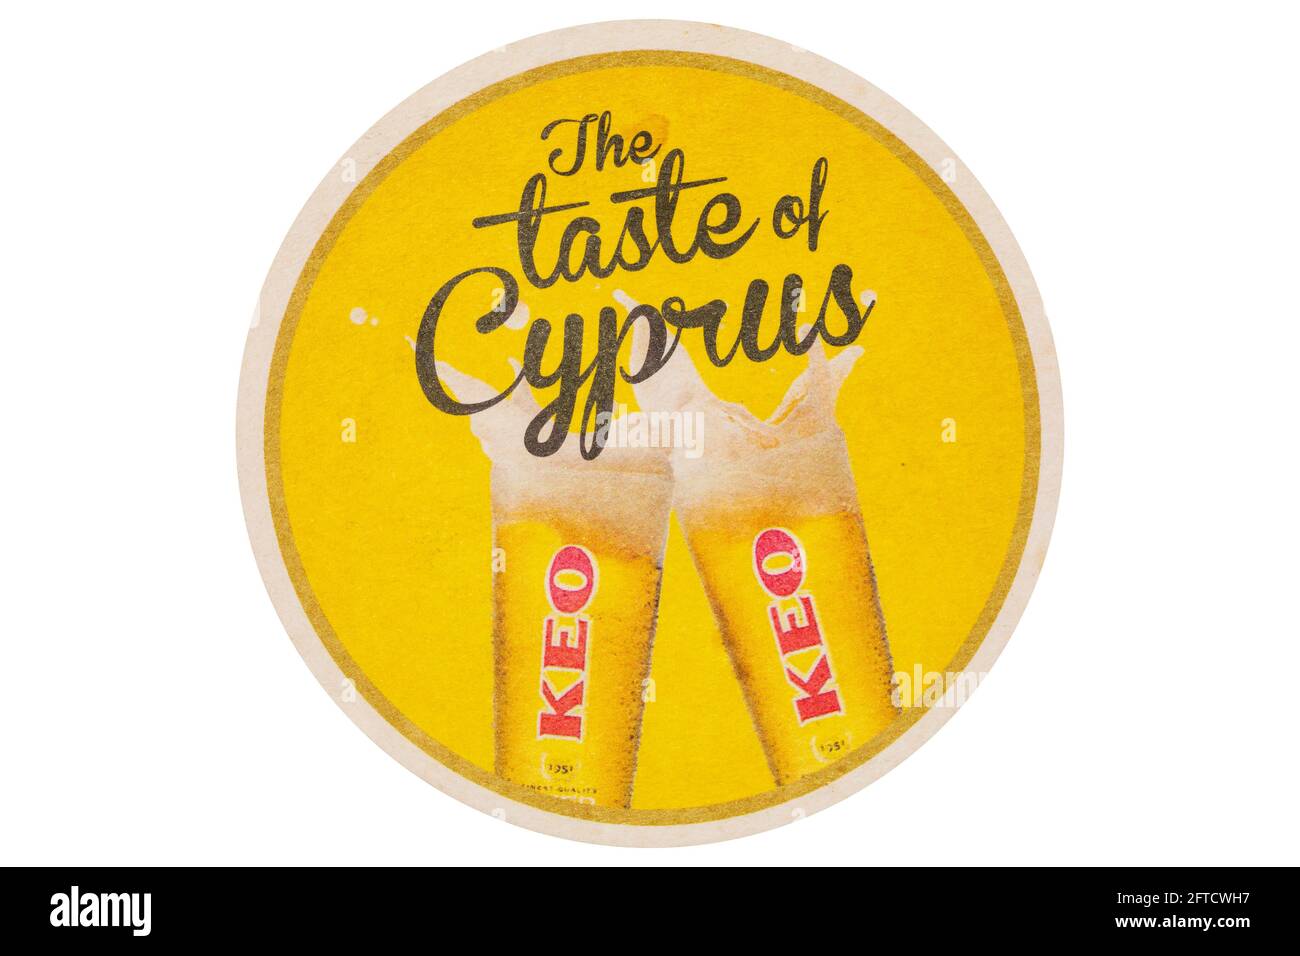 Cypriot Keo beer Beermat from Cyprus, cut out on white. Stock Photo